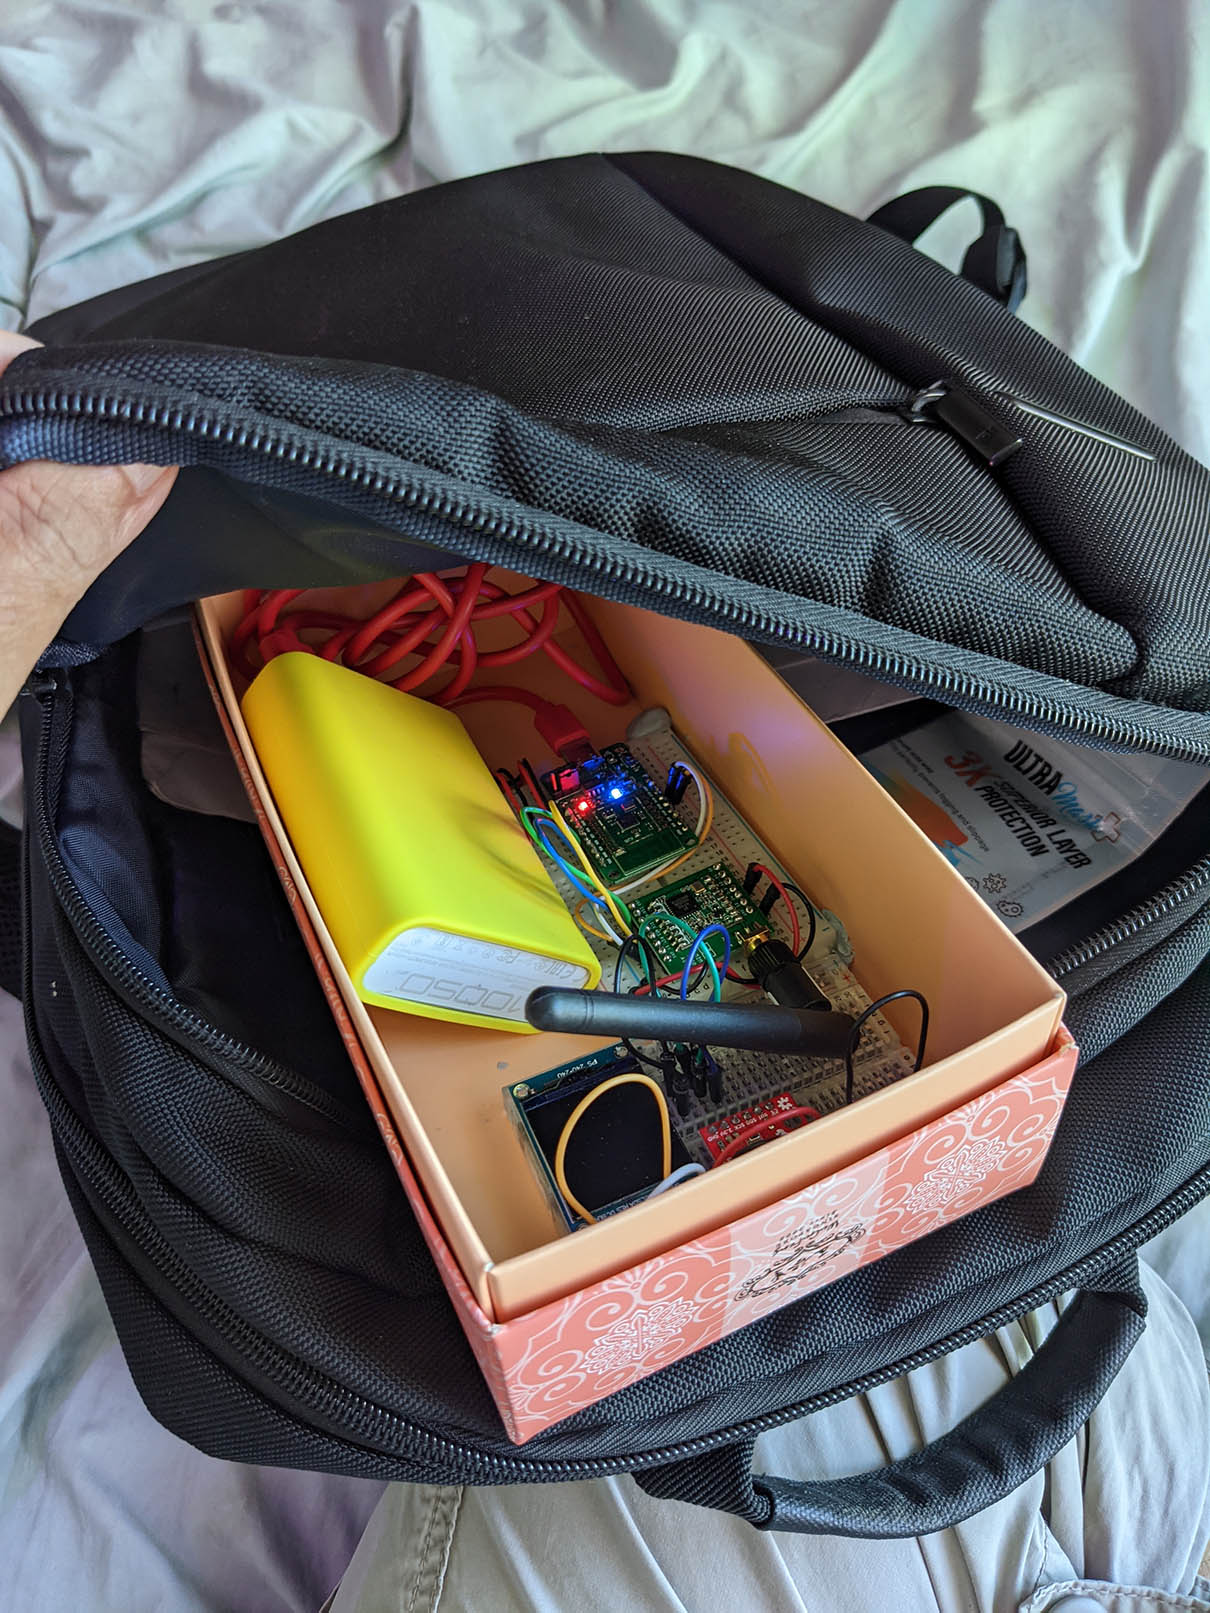 LoRa Transmitter Kit in a backpack